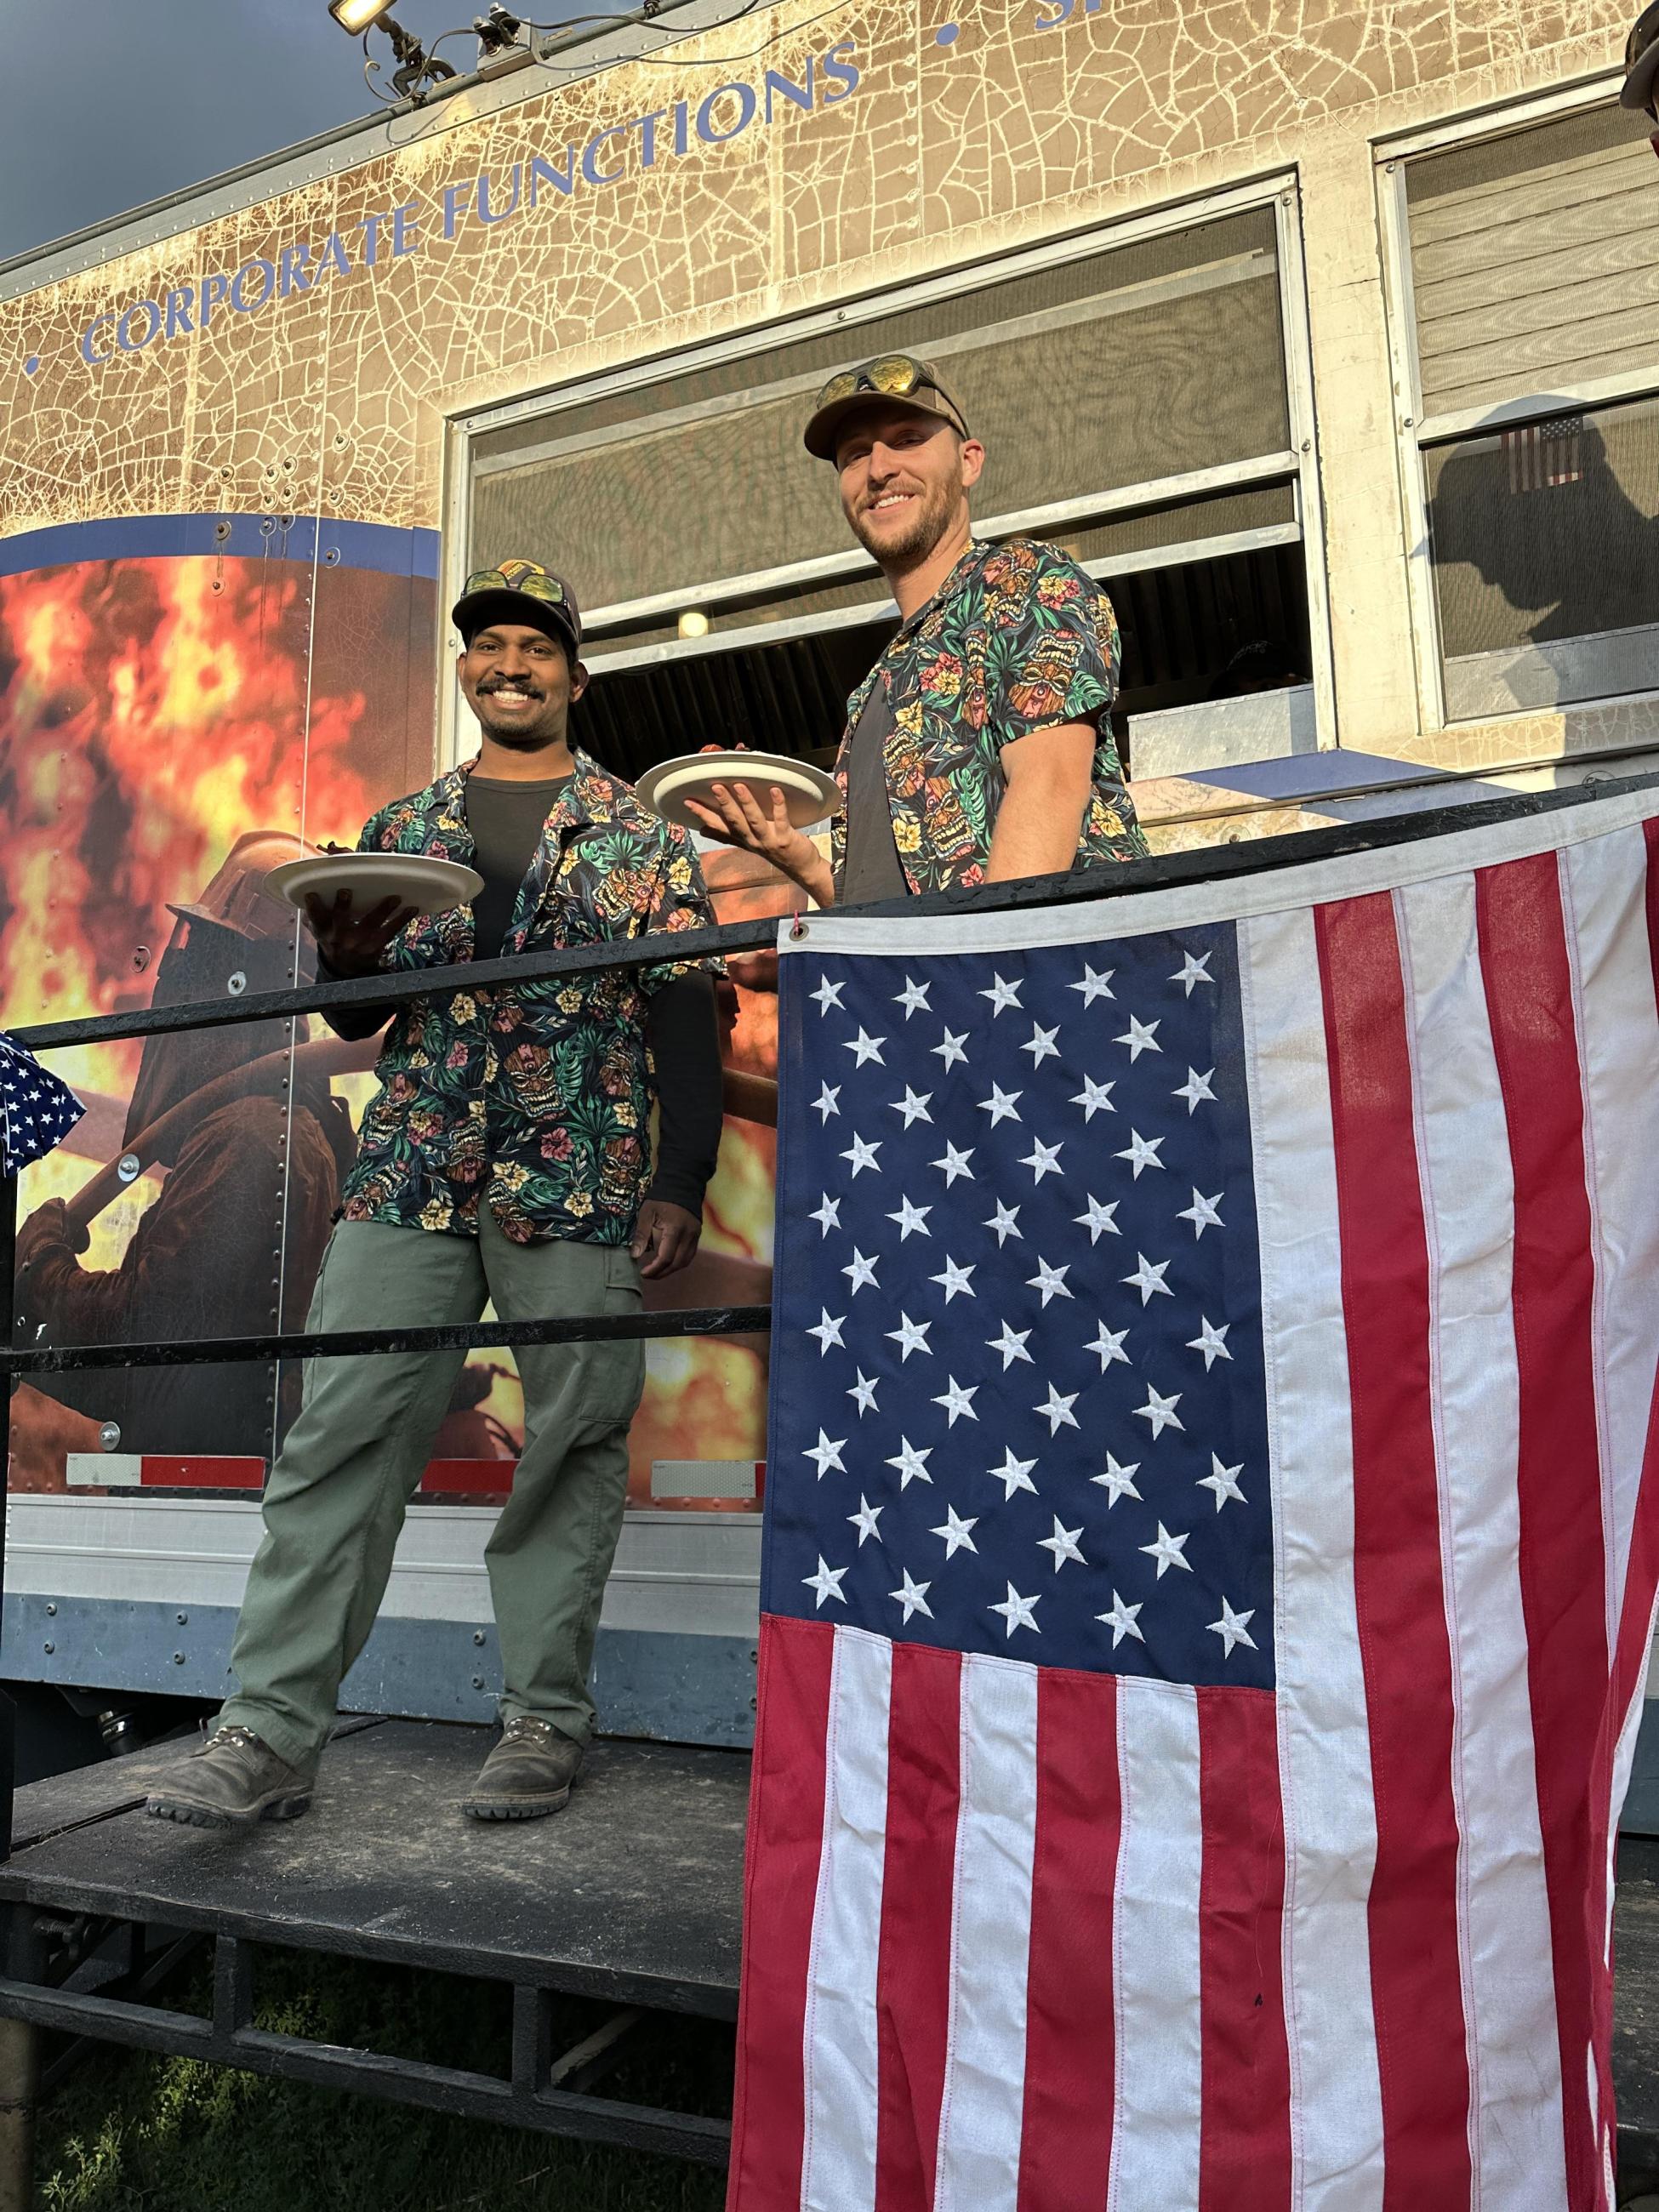 Two members of a fire crew wear festive shirts at breakfast on the fourth of july